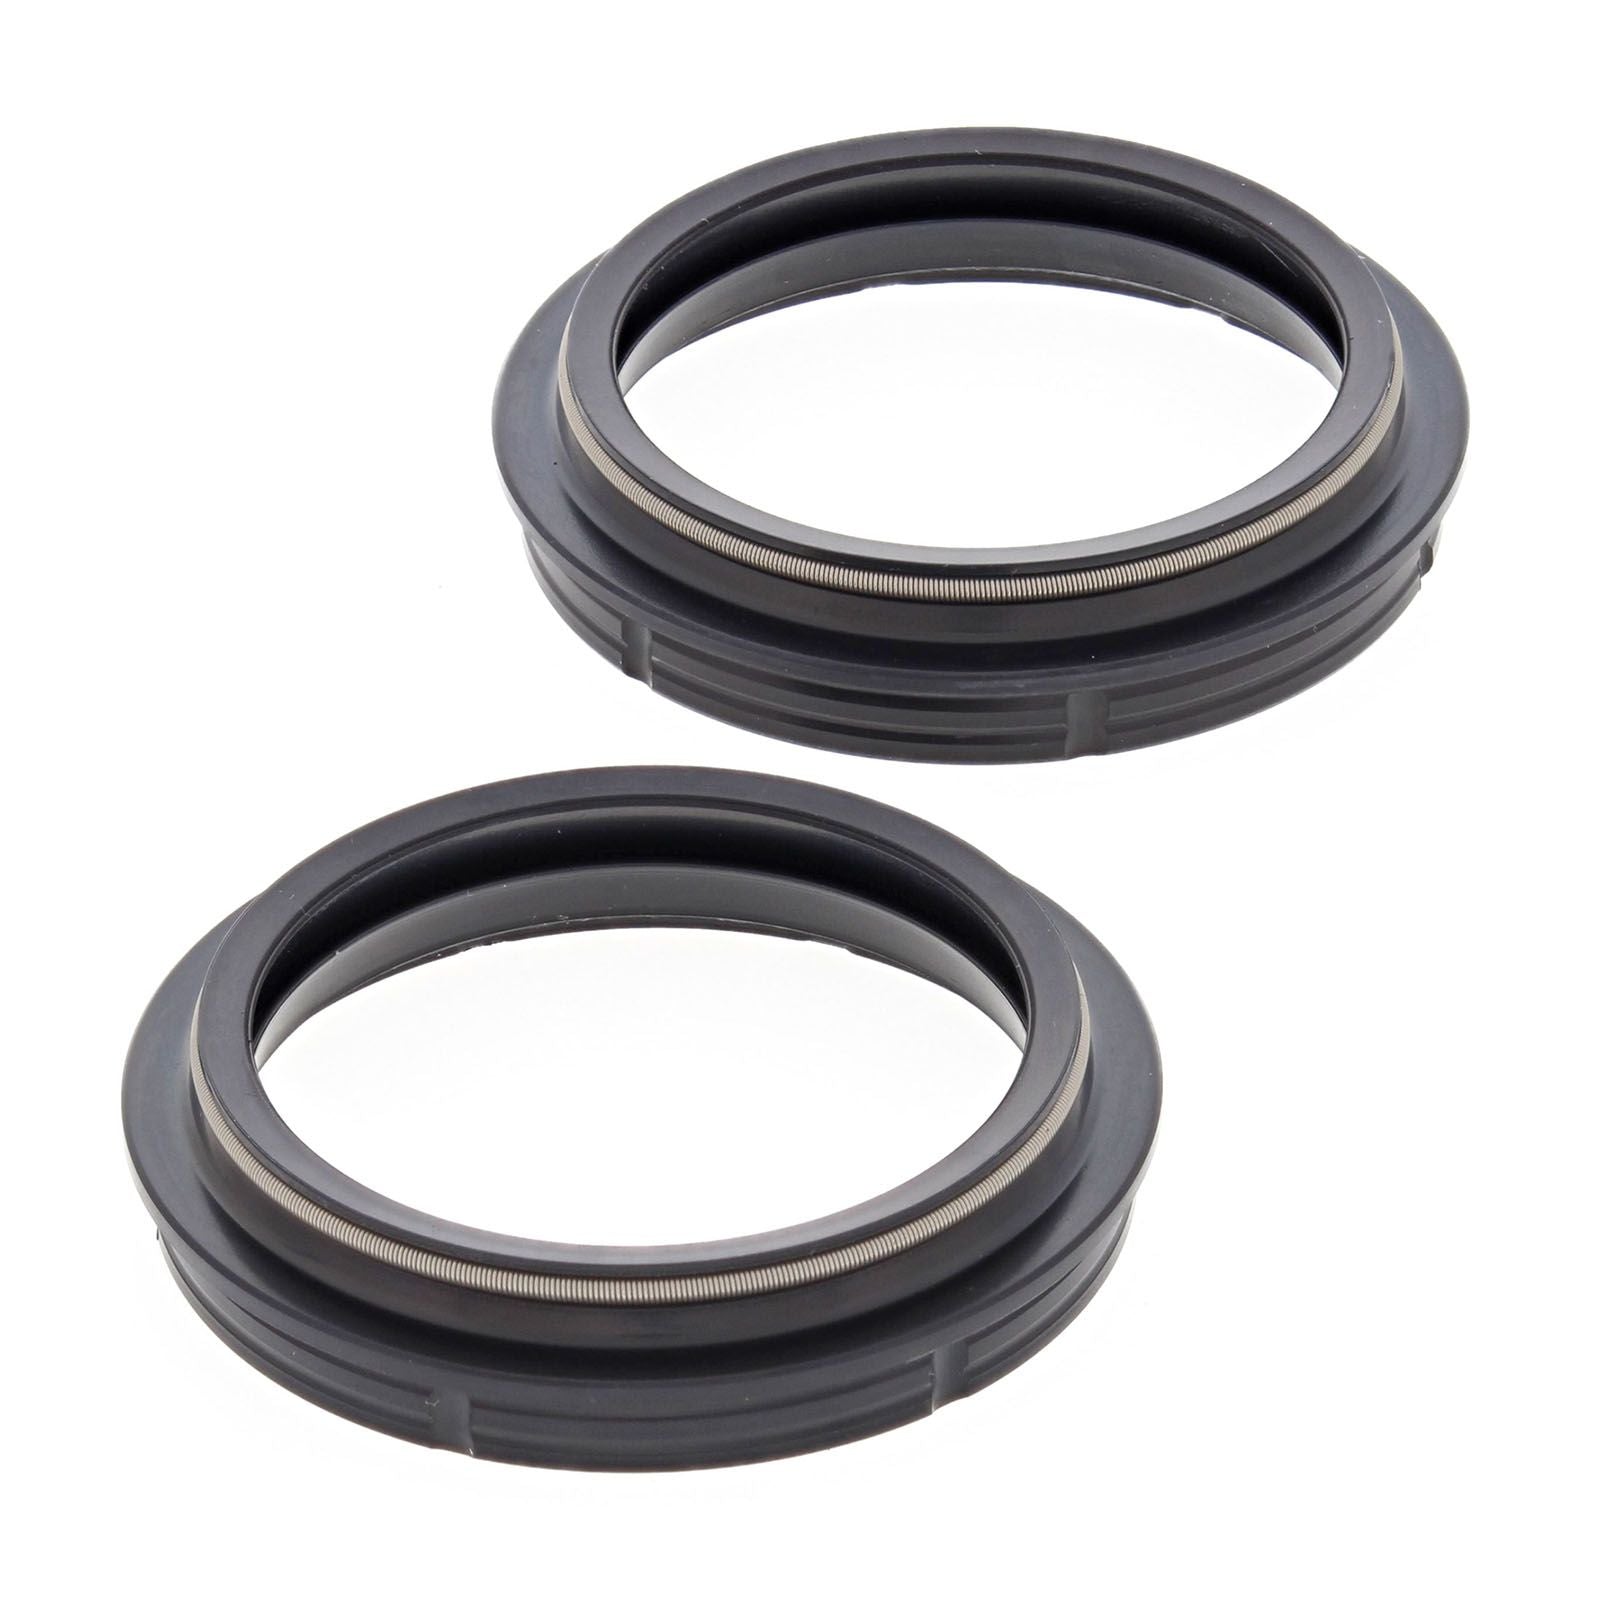 New ALL BALLS Racing Fork Dust Seal Pair 48x58.5x12 #AB57105